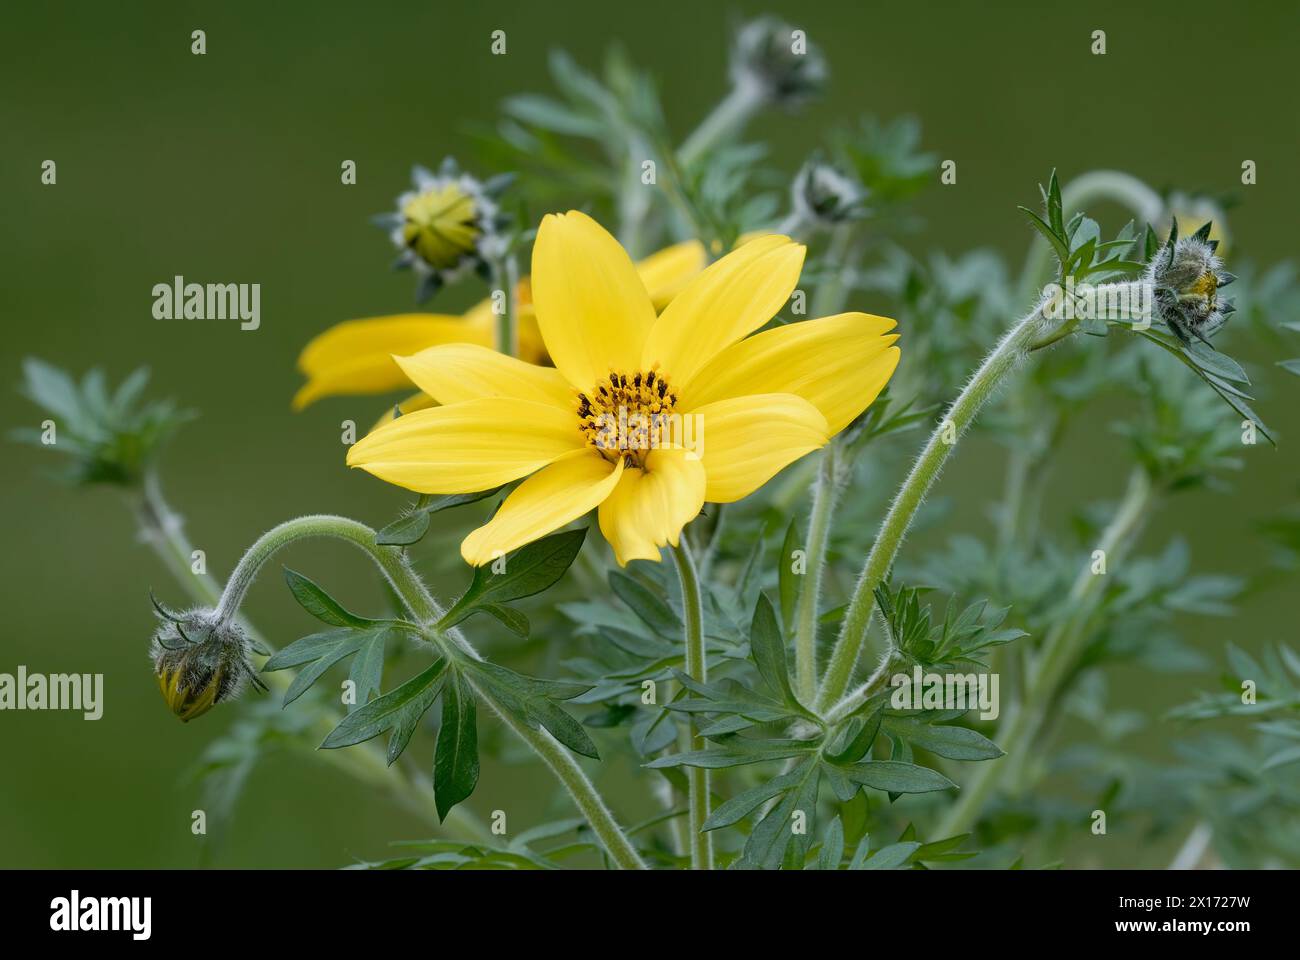 Yellow Bidens ferulifolia flower, Charm with buds, close up. Full bloom. Ornamental plant. Isolated on natural green background. Trencin, Slovakia Stock Photo